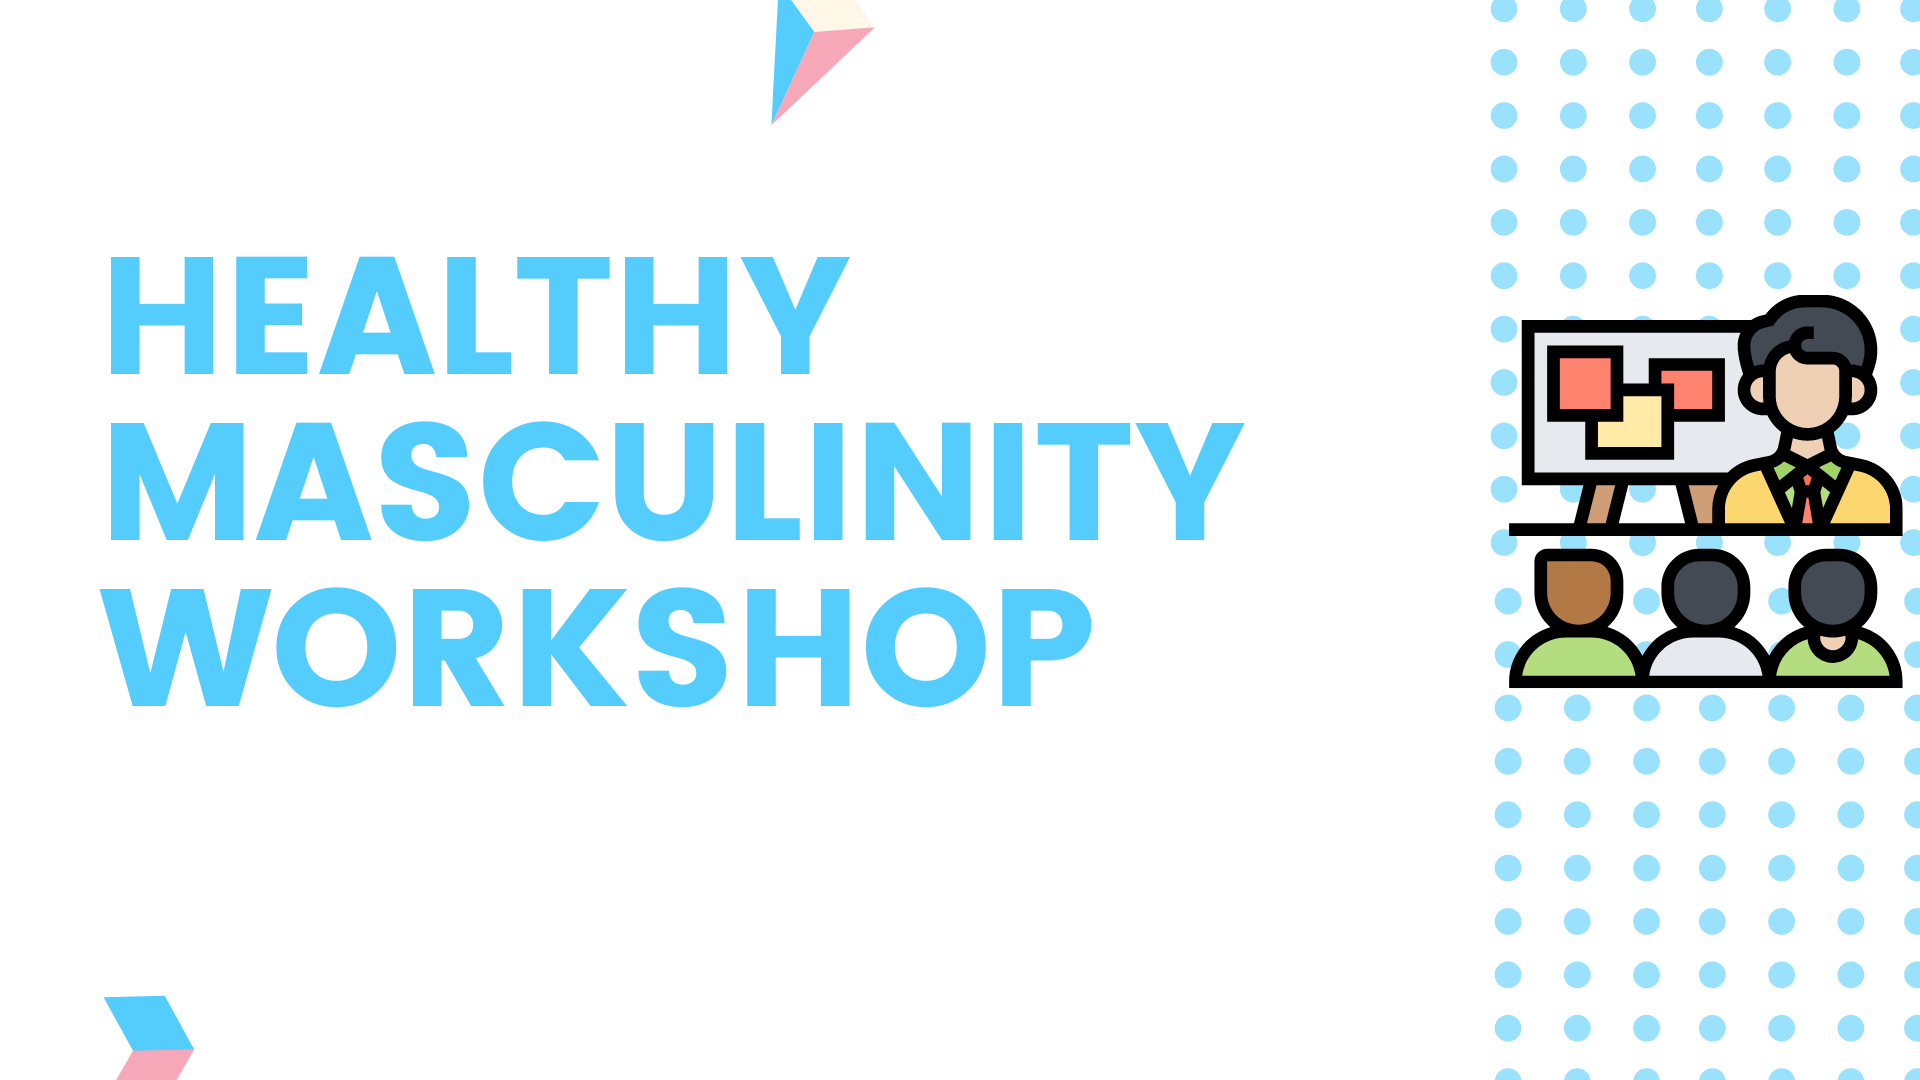 The Healthy Masculinity Workshop featuring an icon of 3 people watching another person present information on a board